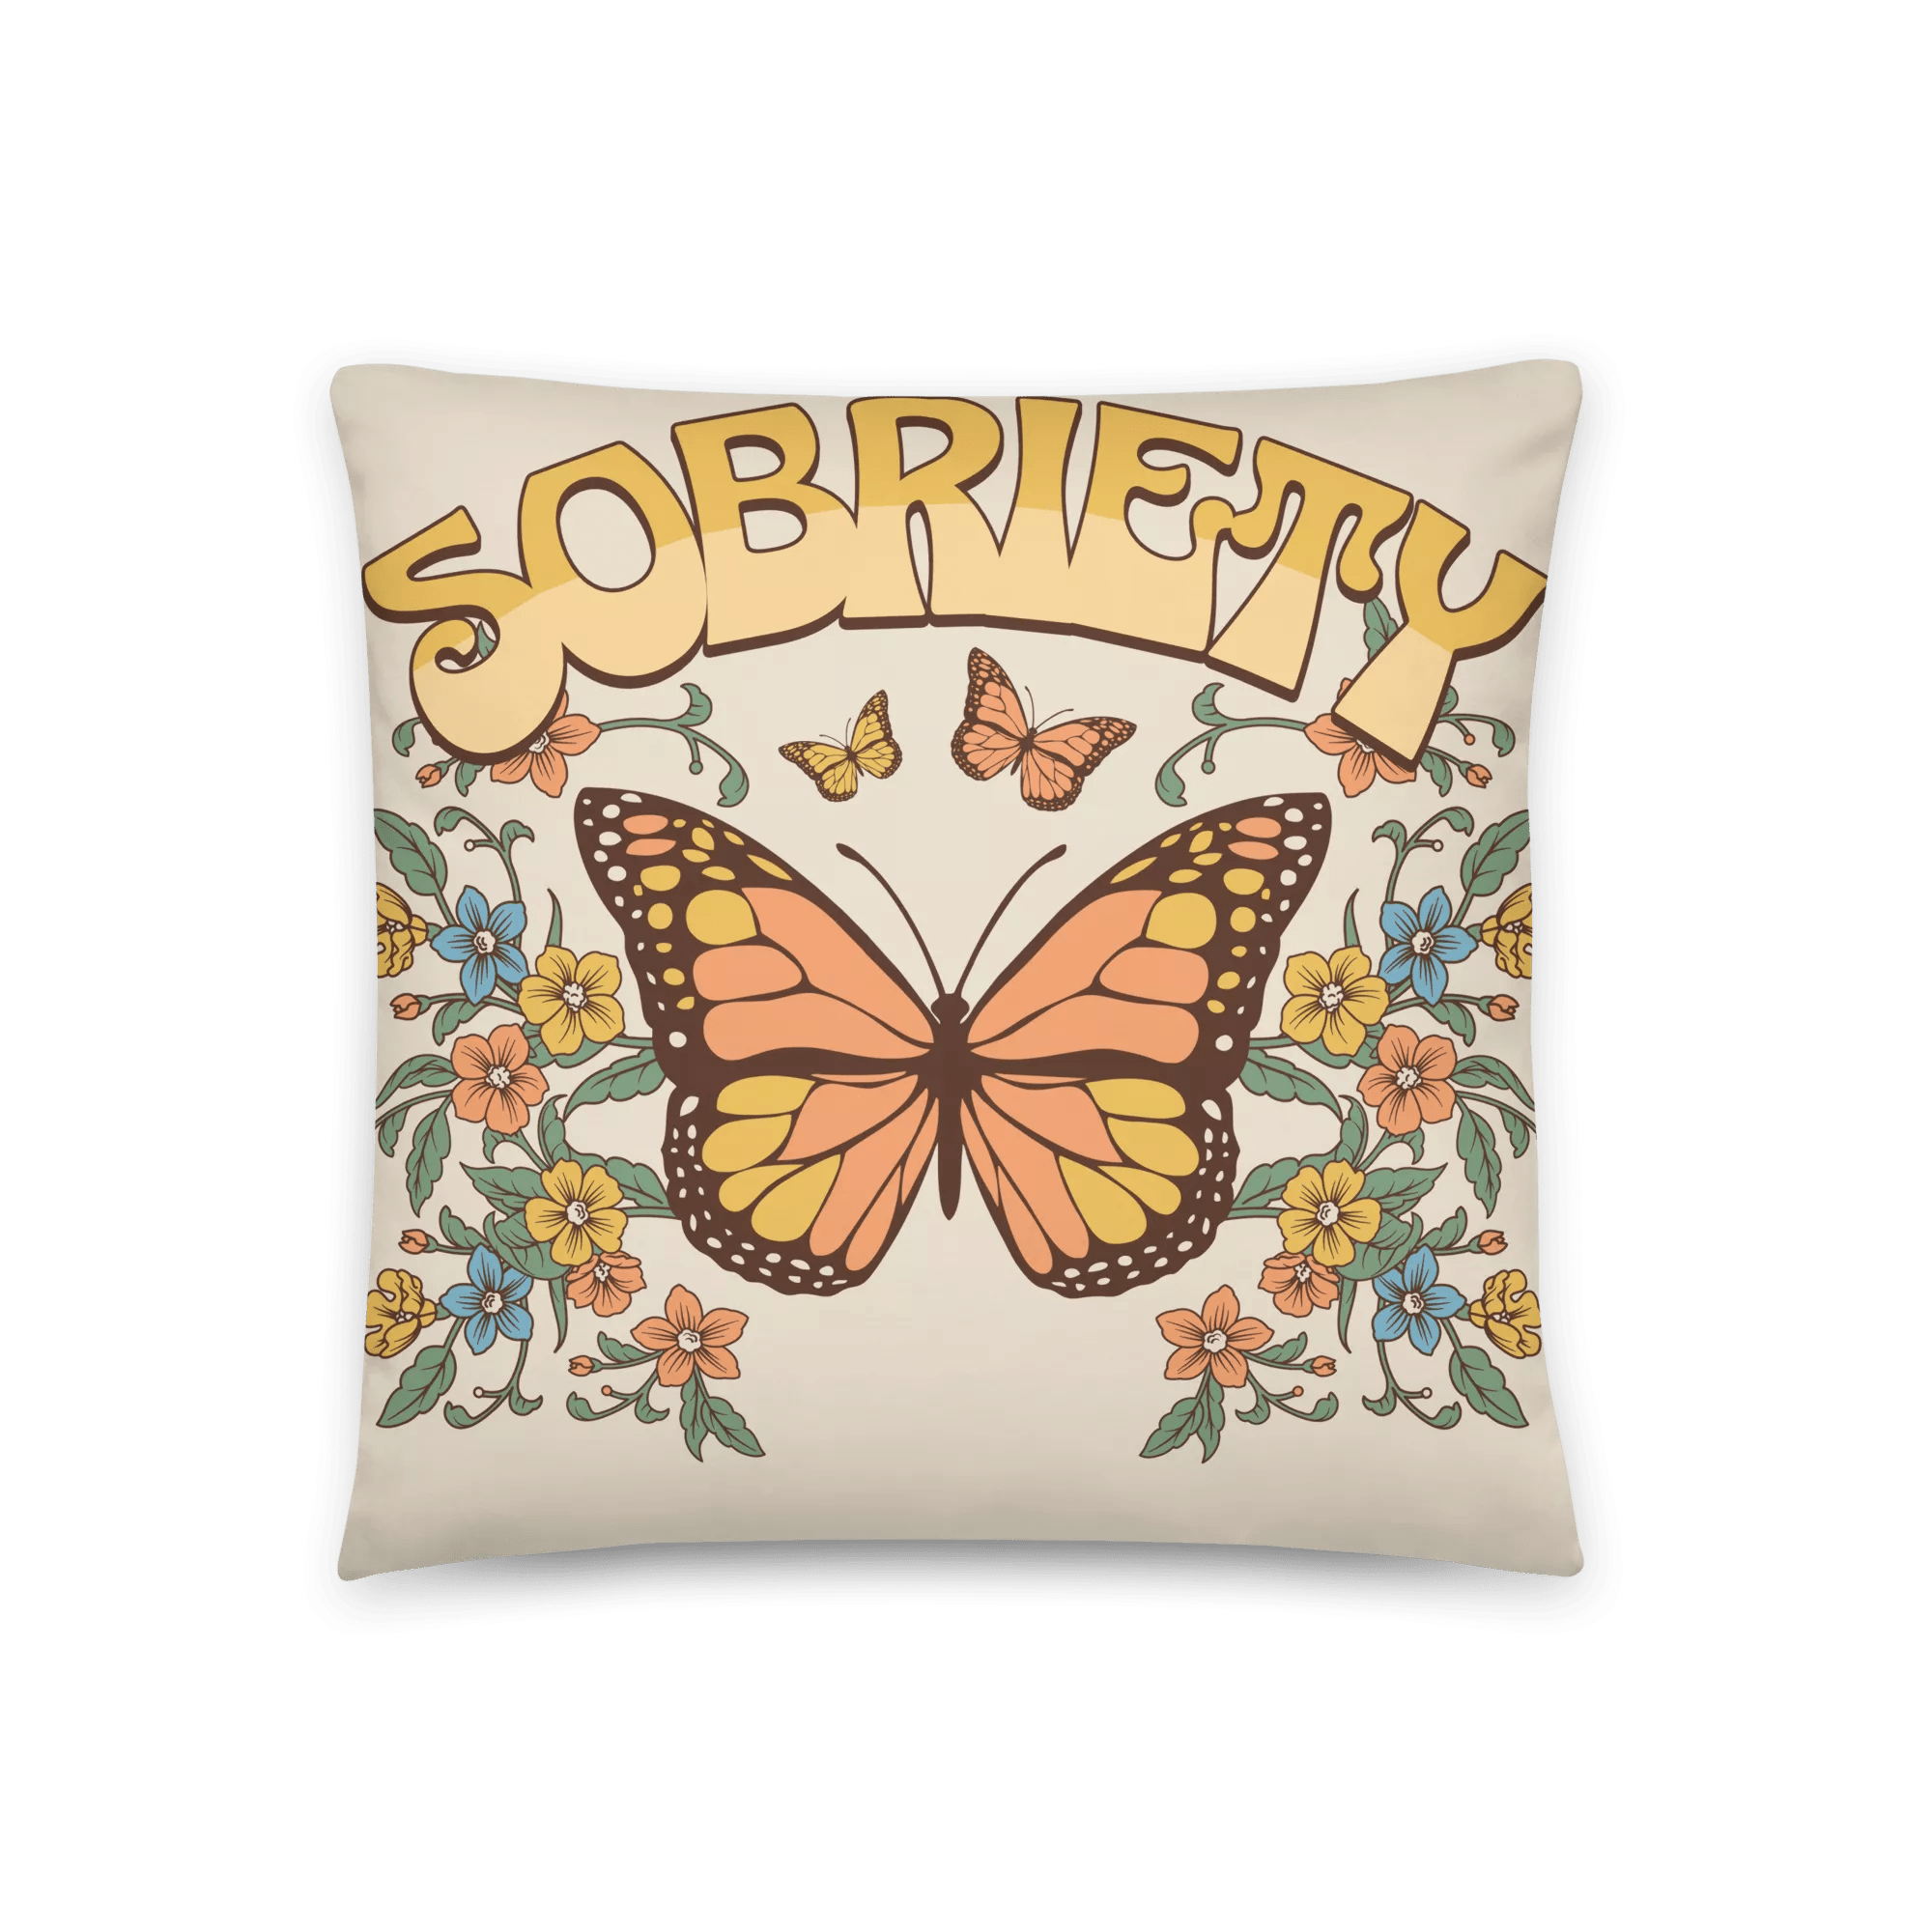 Sobriety Butterfly Accent Pillow - Sobervation